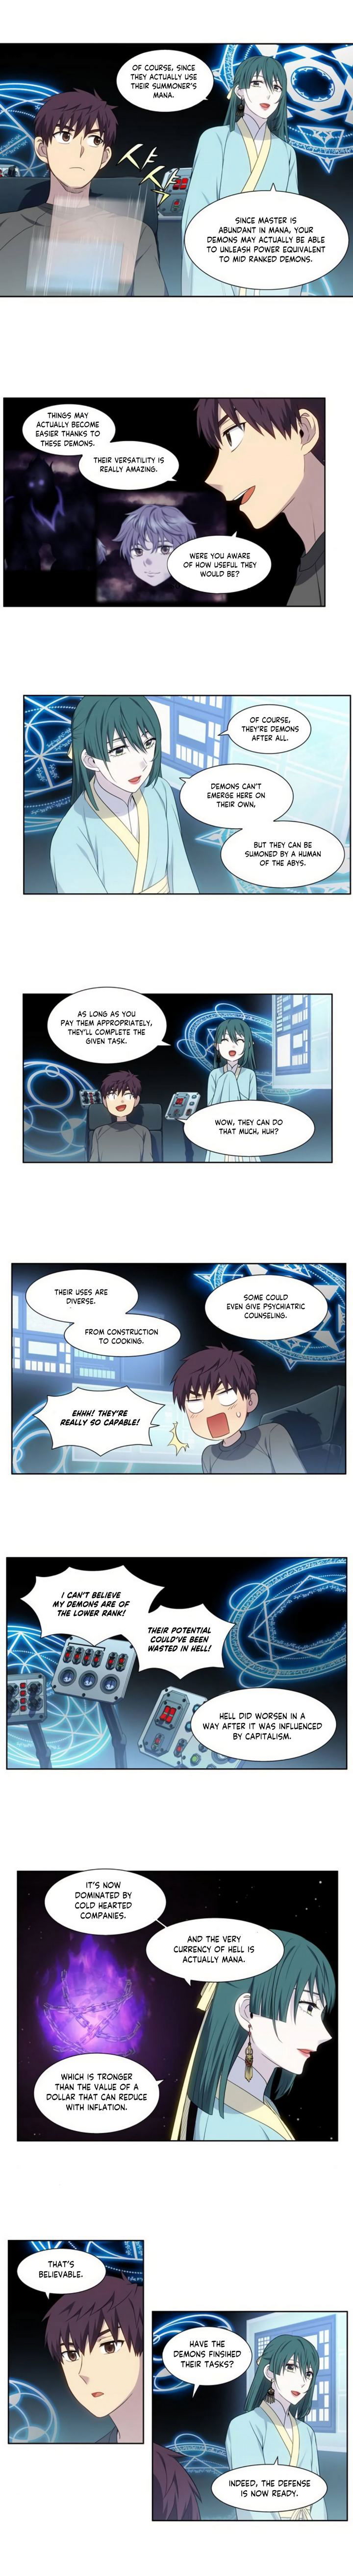 the-gamer-chap-358-6